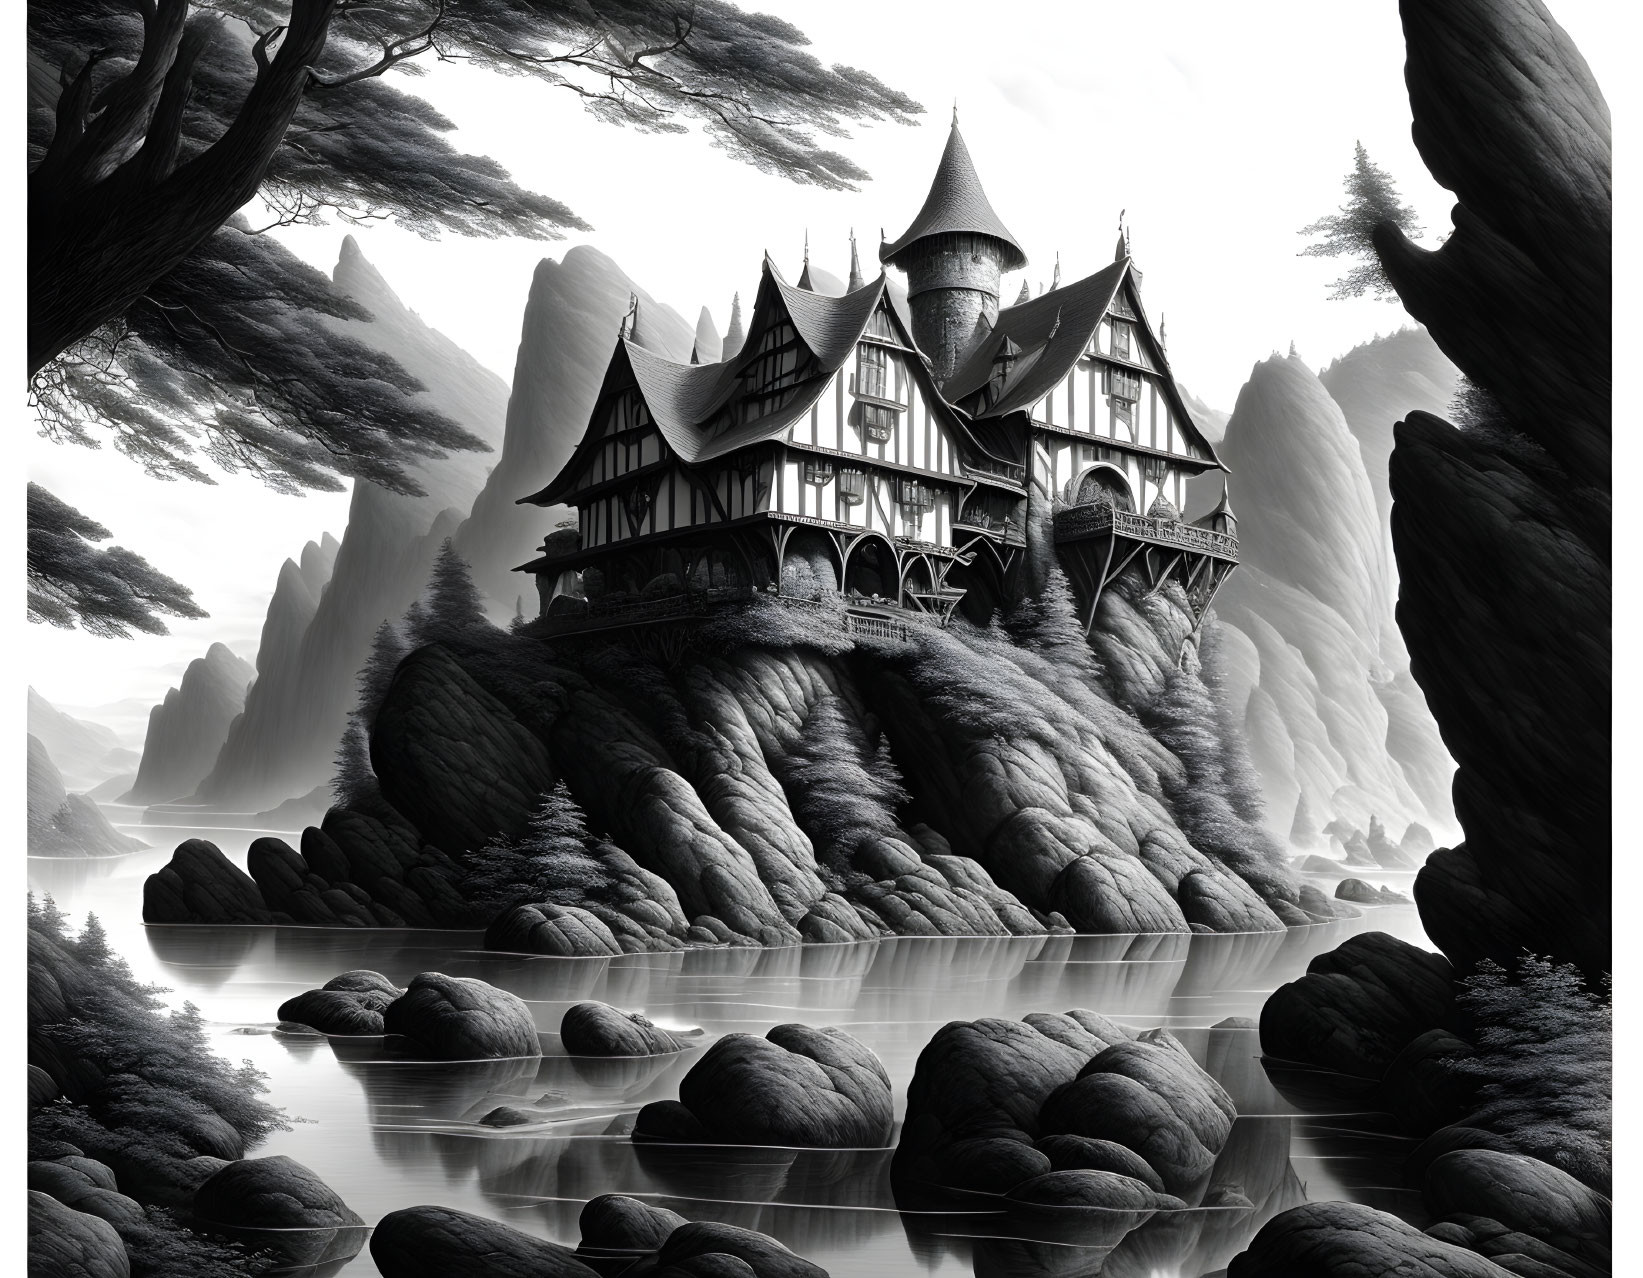 Monochrome fantasy castle on rugged cliffs in ethereal forest